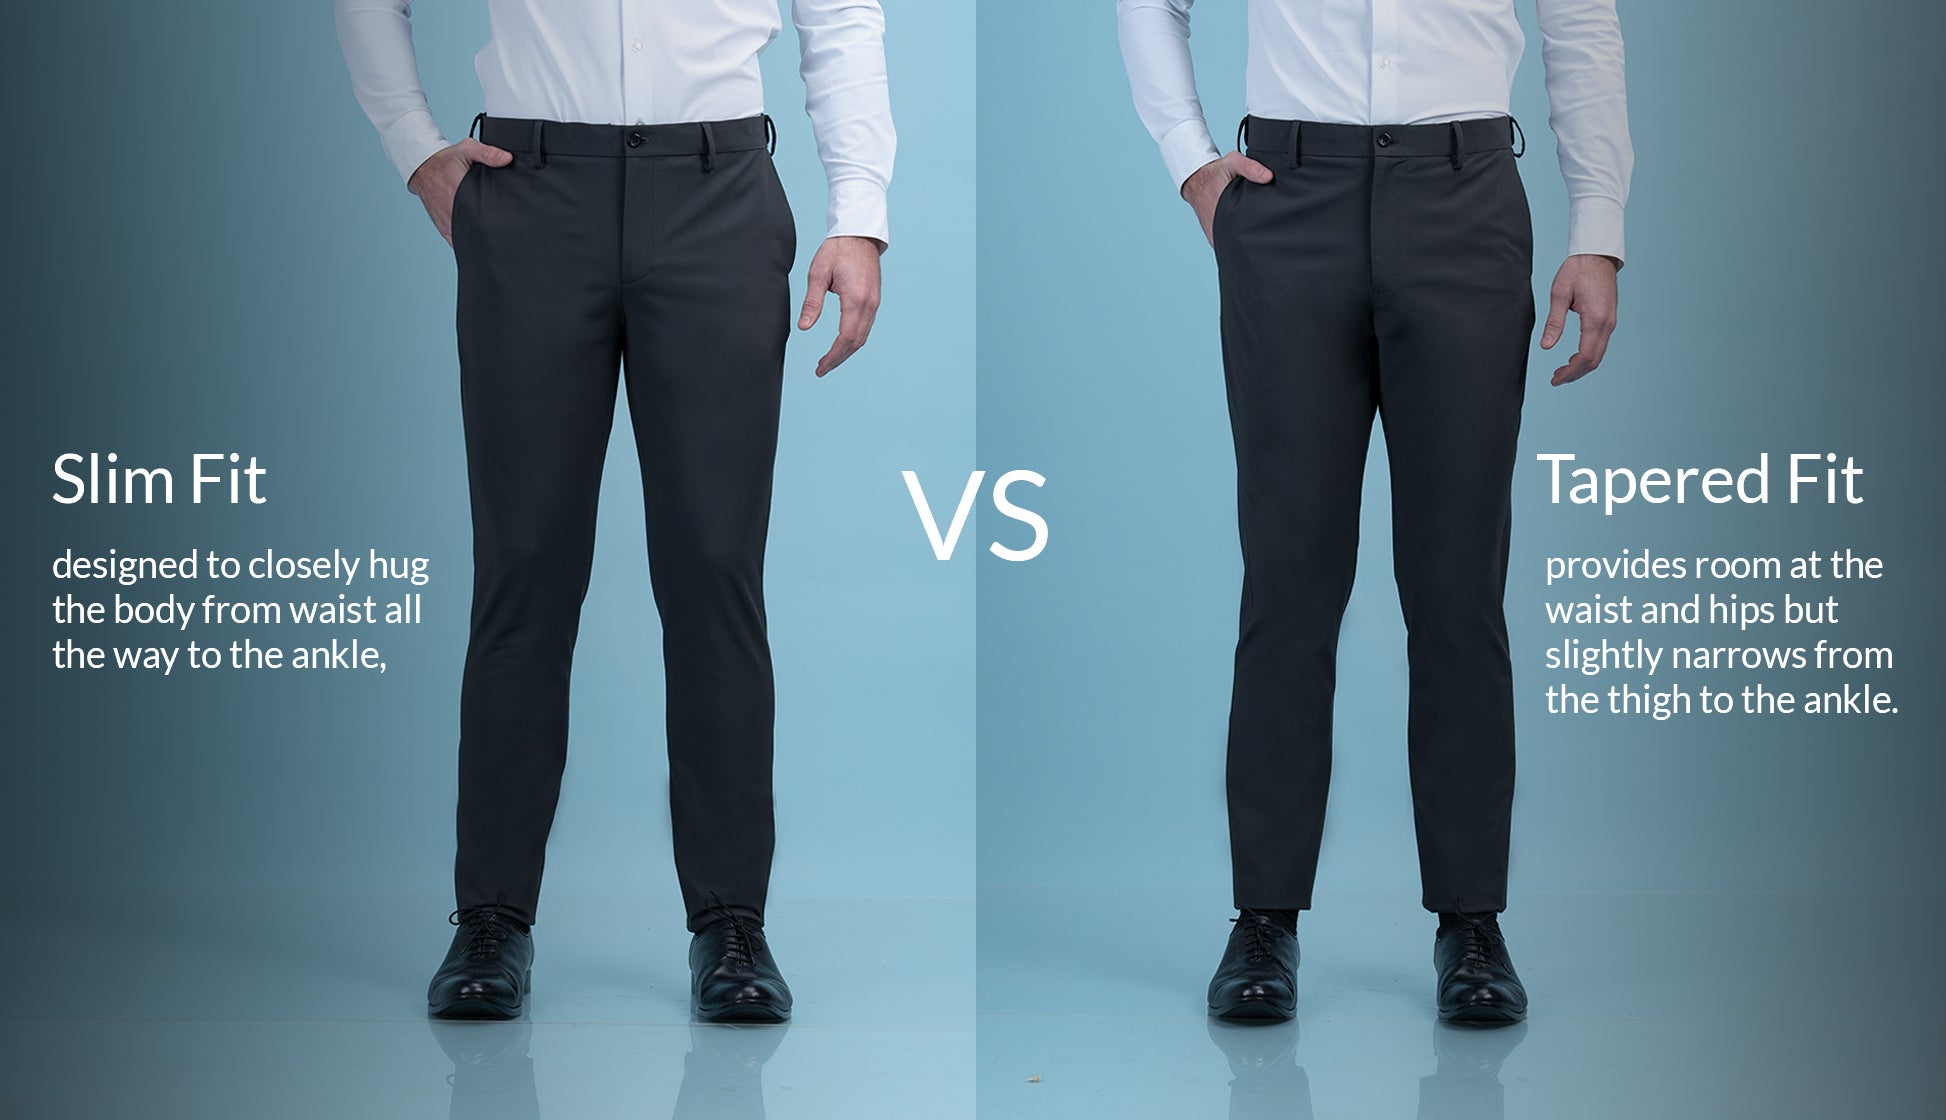 Slim Fit vs. vs. What's the Difference?